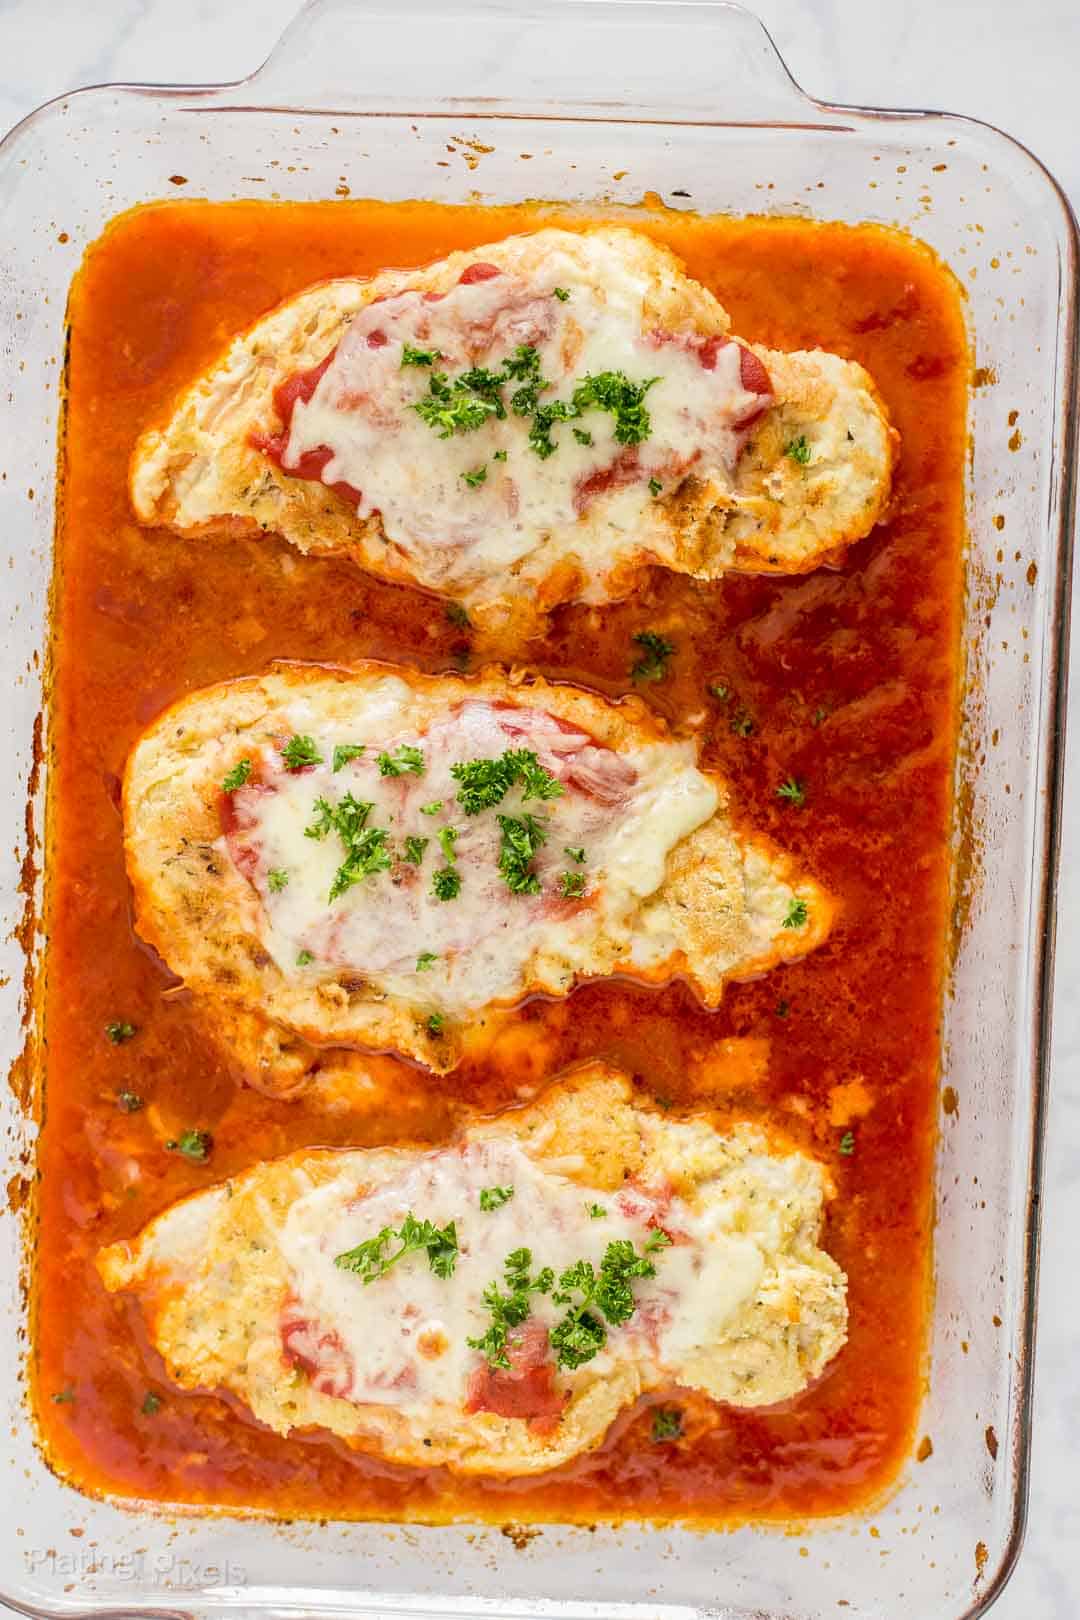 Keto Baked Chicken Parmesan in a glass dish.